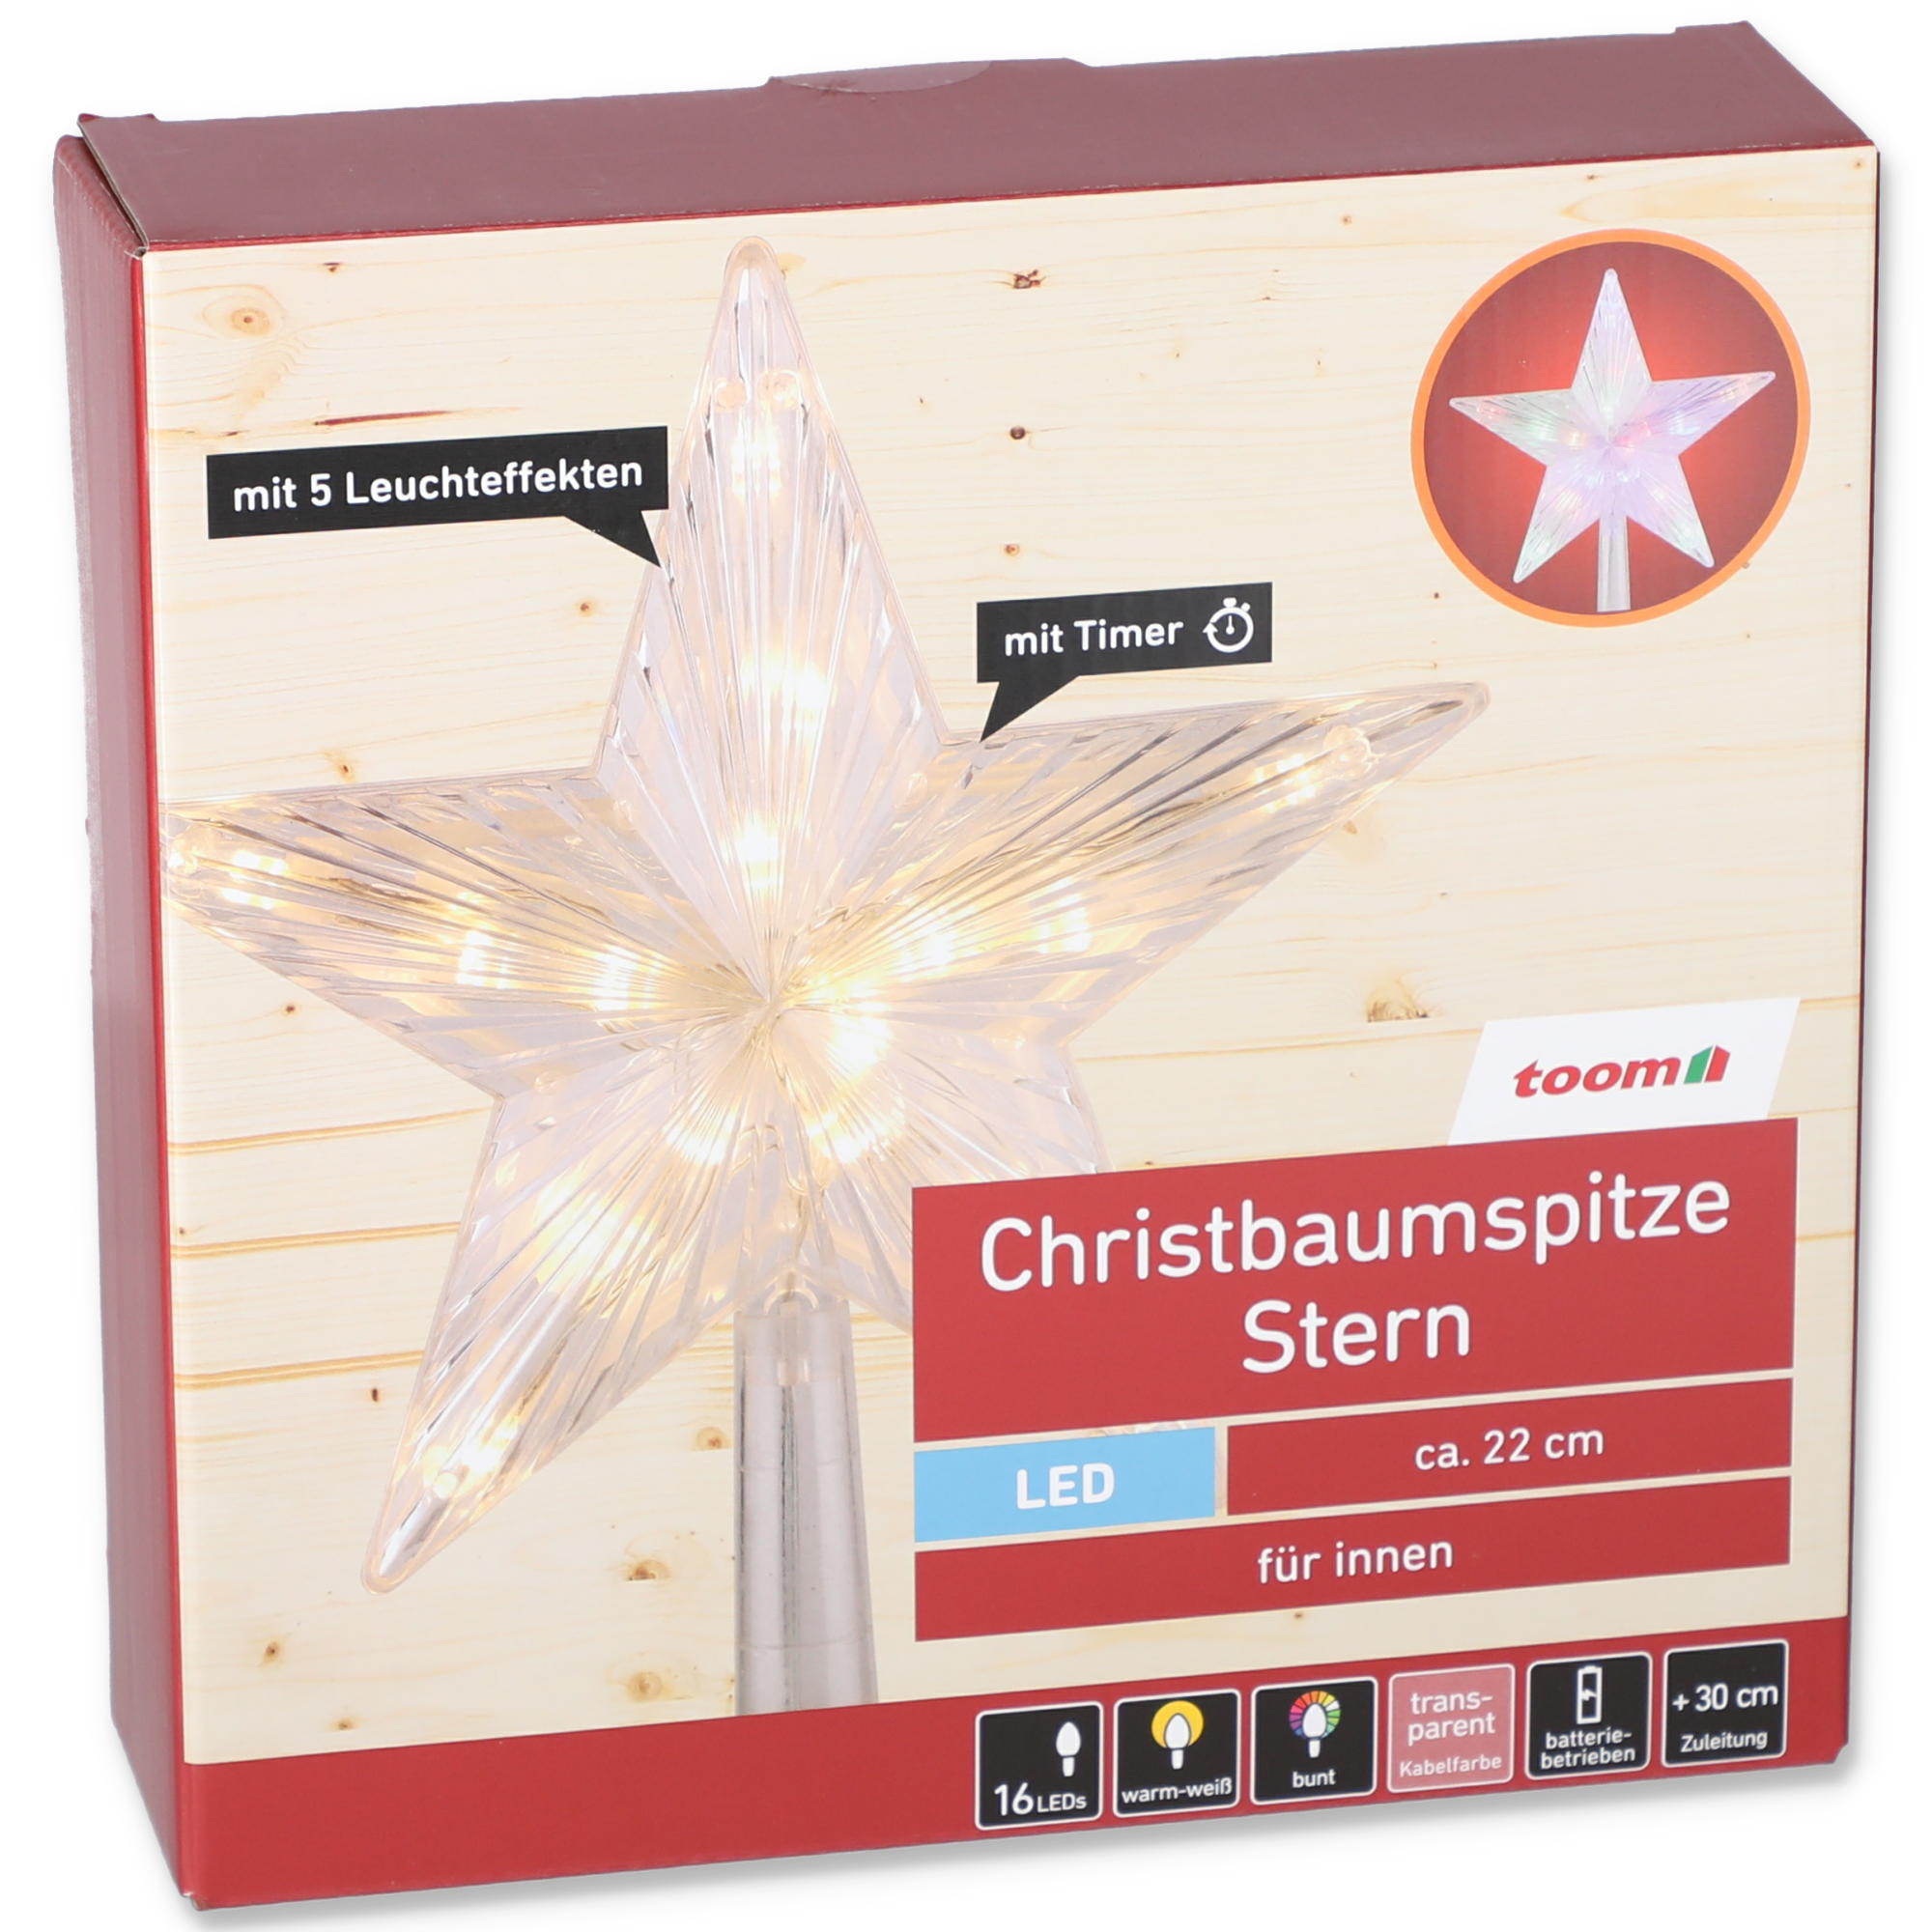 LED-Christbaumspitze 16 LEDs warmweiß/bunt 22 cm + product picture